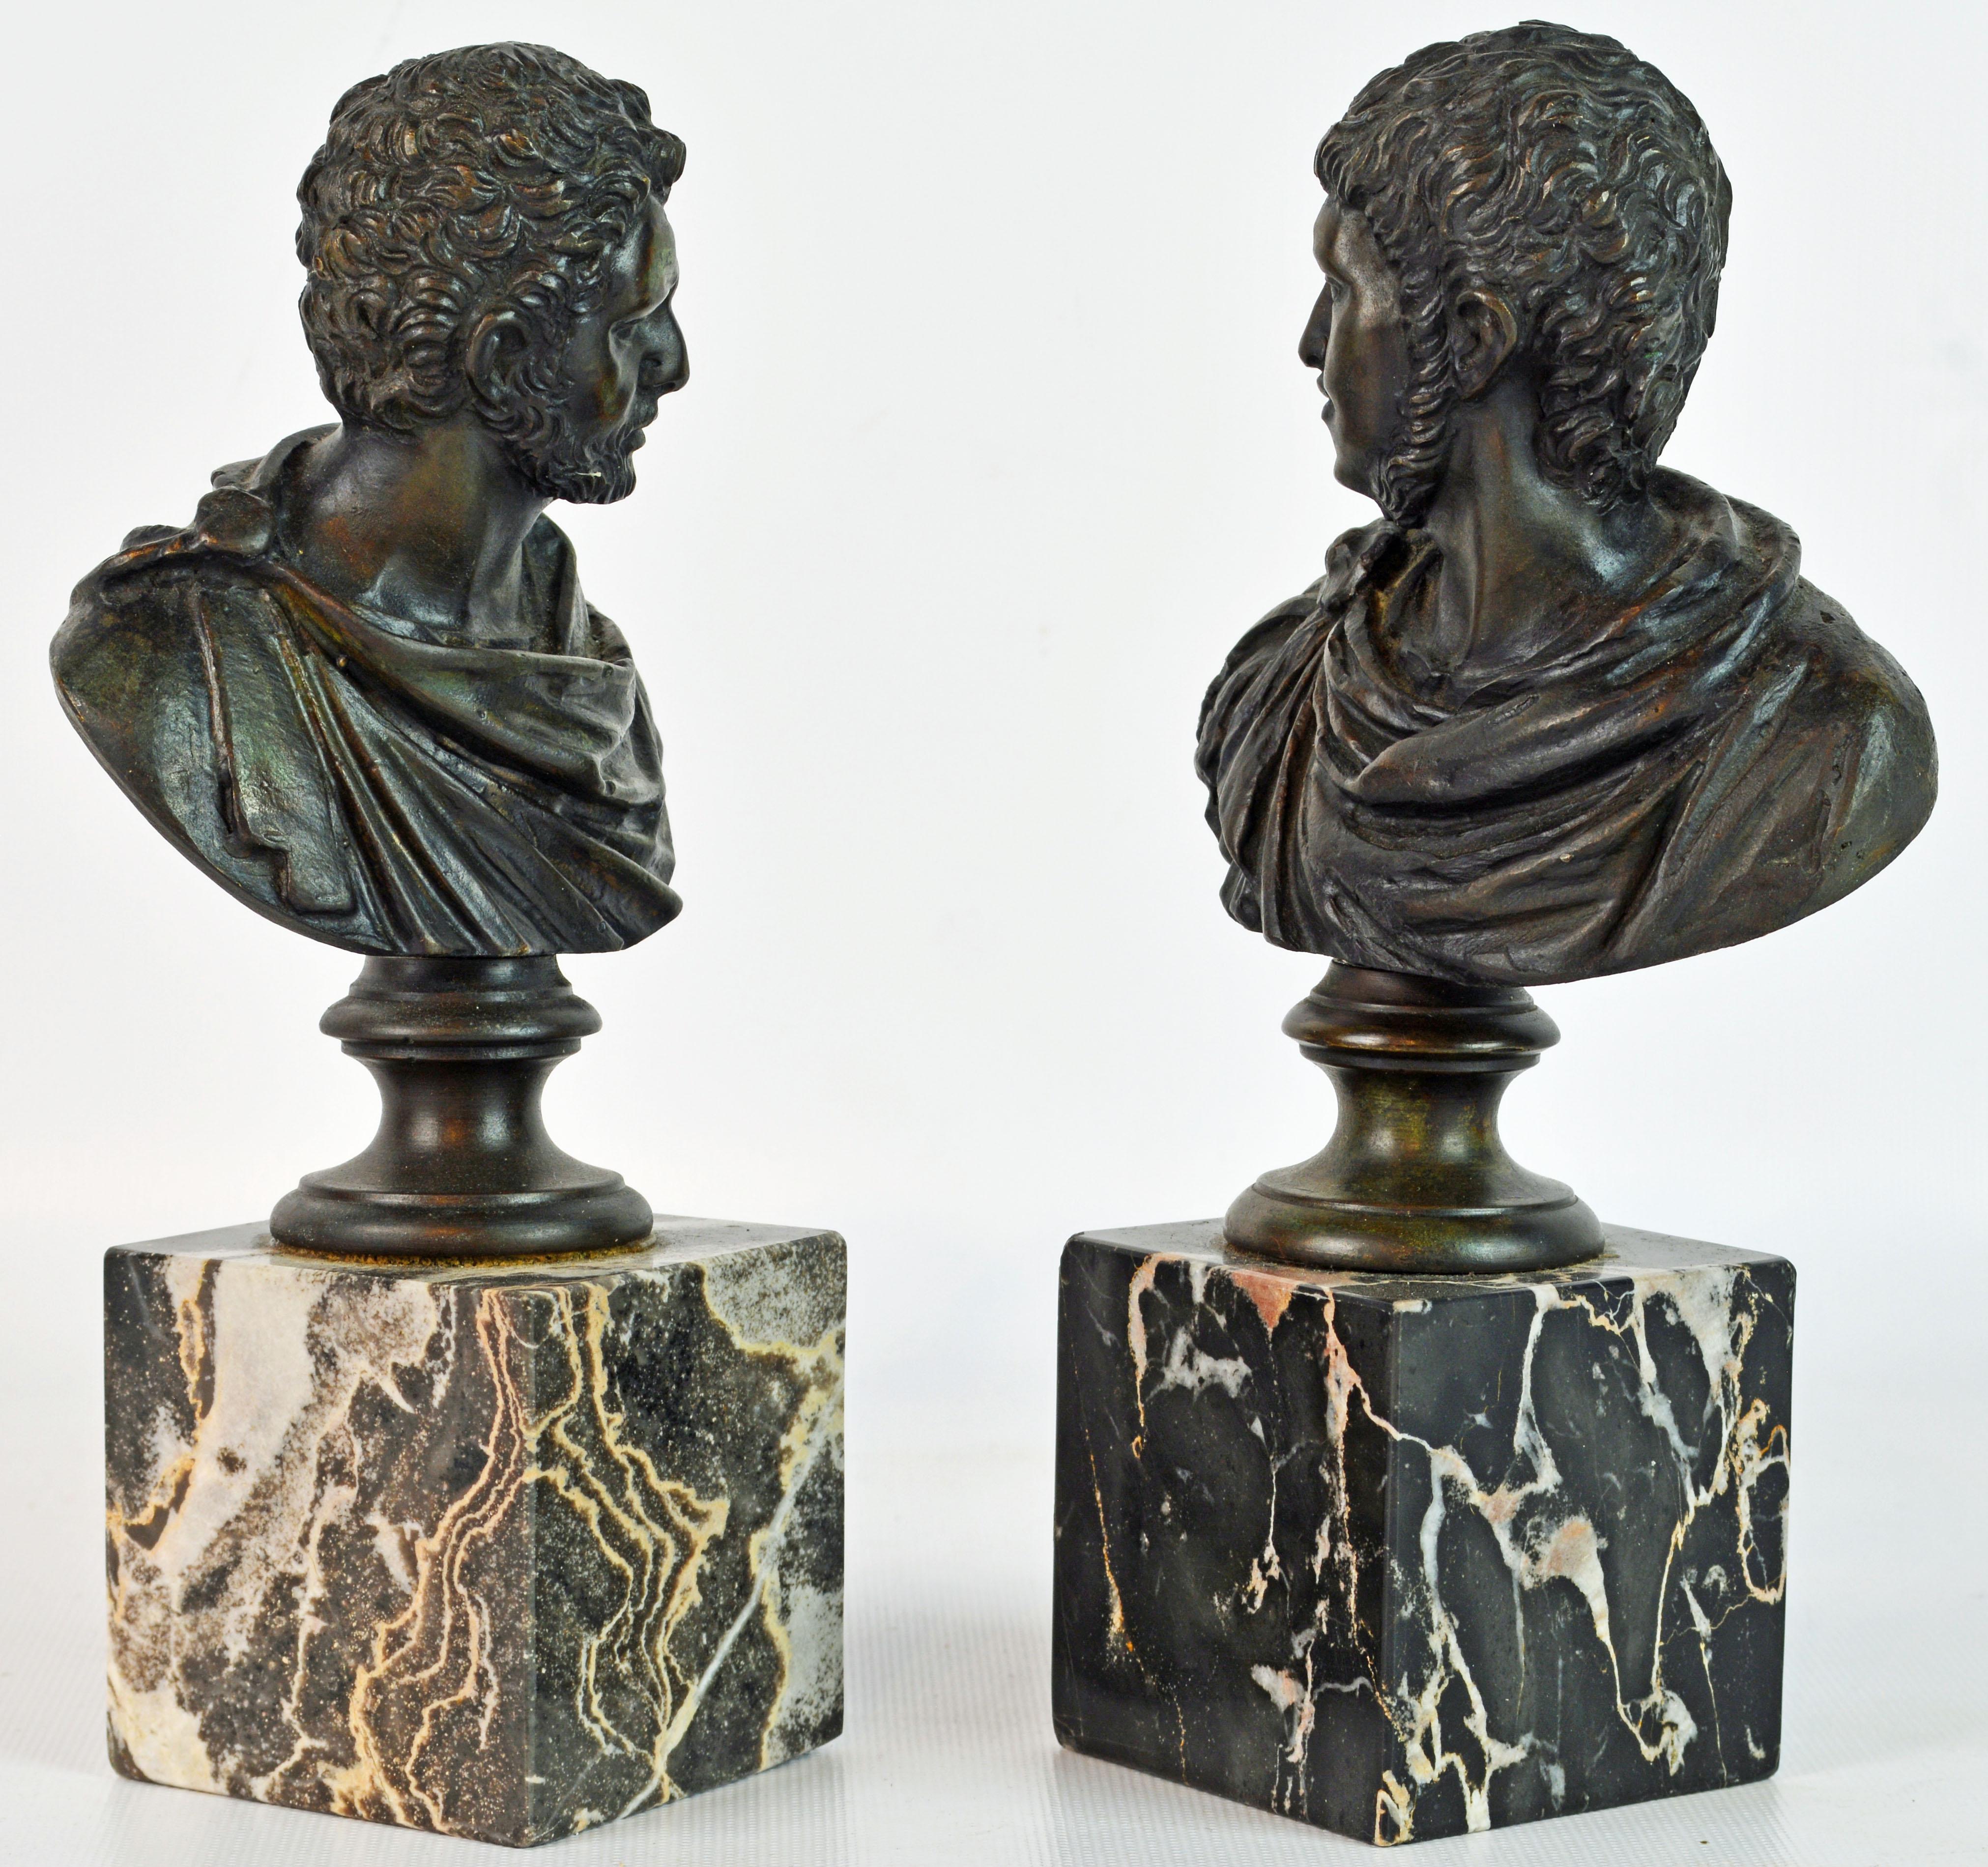 A fine pair of small Italian Grand Tour patinated bronze busts mounted on square marble bases. The two emperors are well detailed and rest on circular shaped socles.

Caligula was Roman emperor from AD 37 to AD 41. The son of the popular Roman